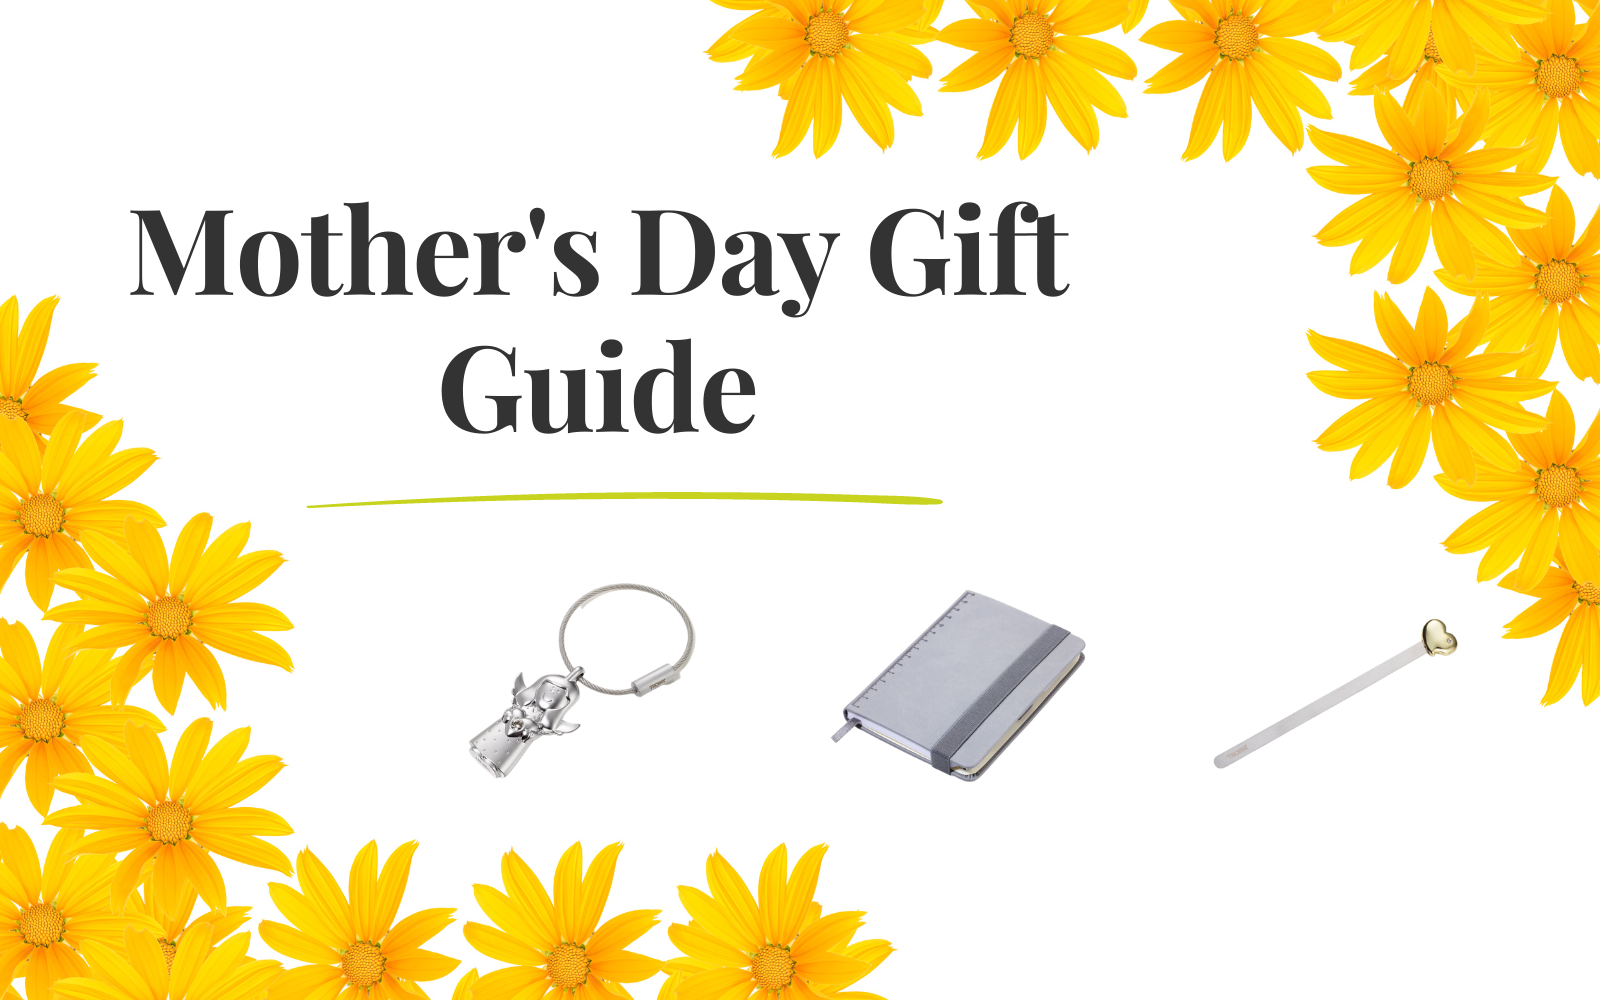 MOTHER'S DAY GIFT GUIDE: IDEAS TO SPOIL YOUR MOM